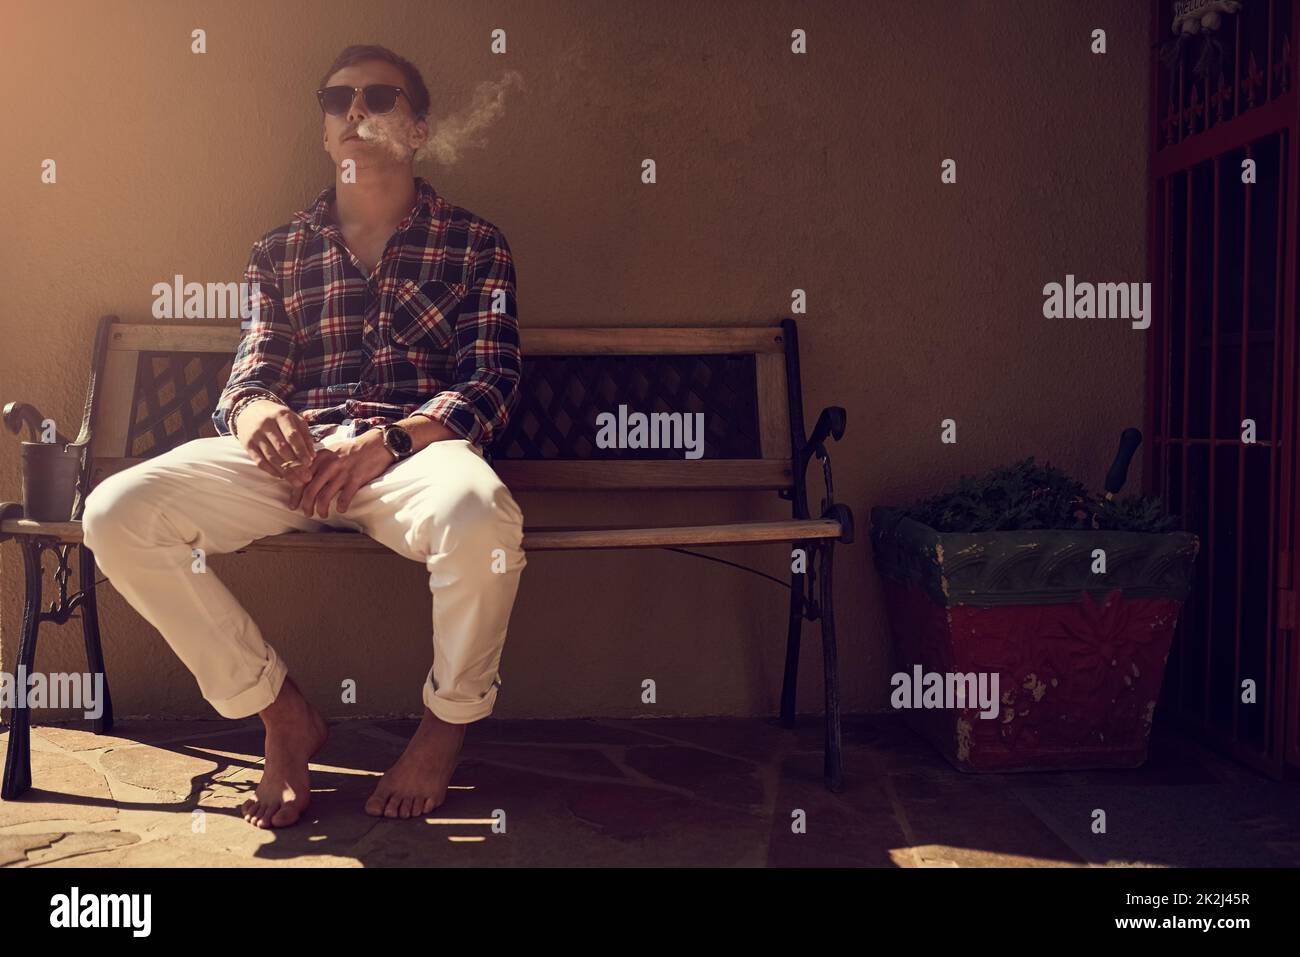 Having a puff on the porch. Shot of a young man sitting on a bench outside and smoking a cigarette. Stock Photo